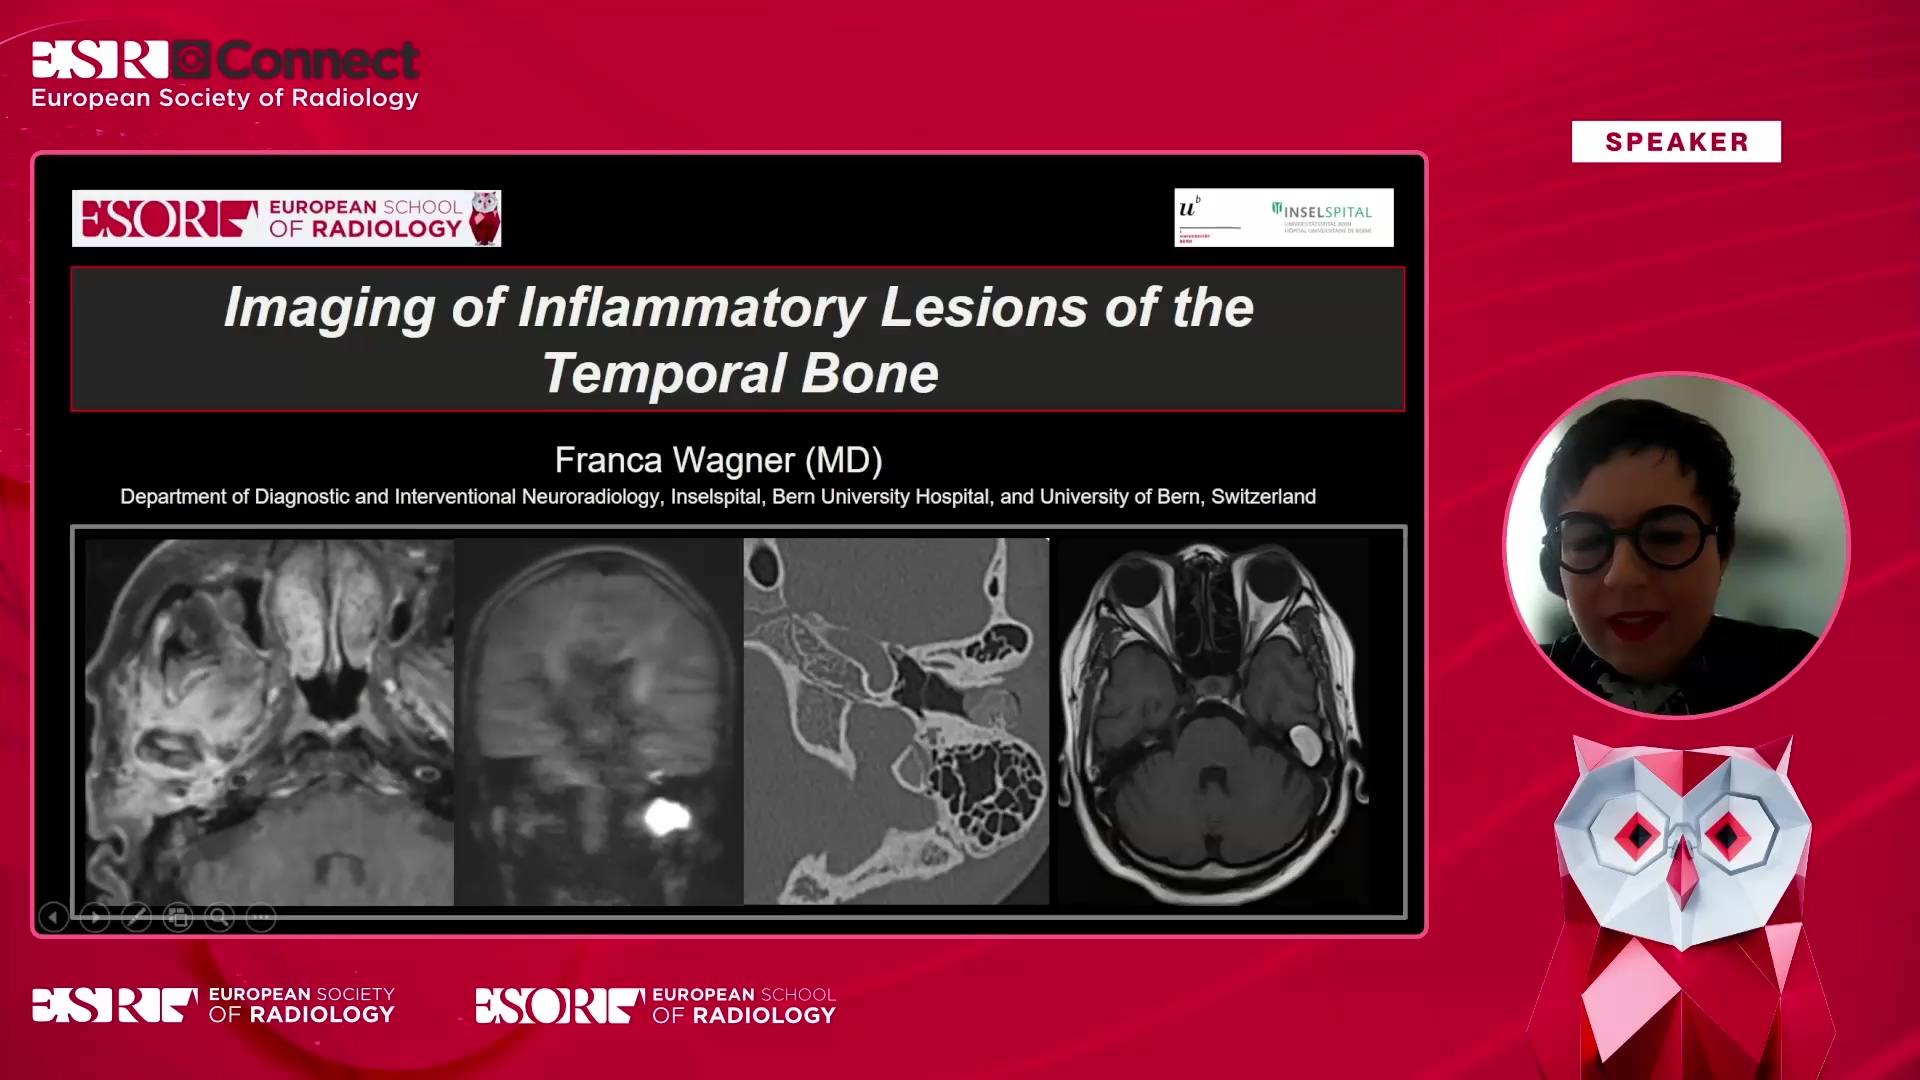 Imaging of inflammatory lesions of the temporal bone